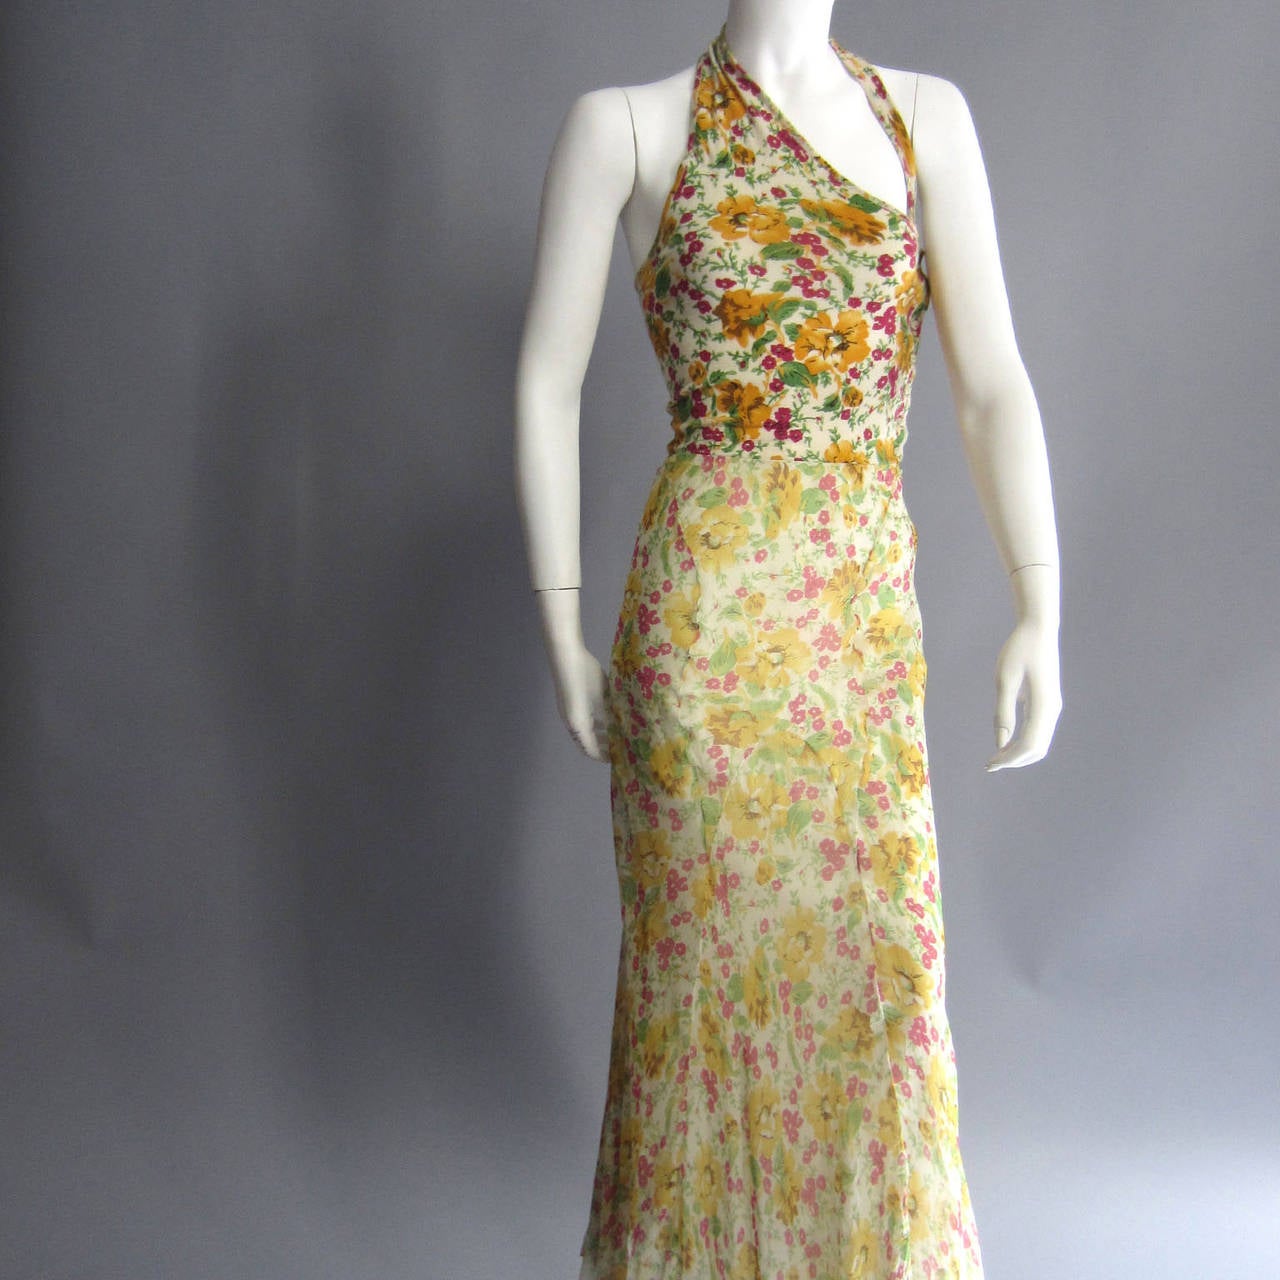 The gorgeous floral print of this gown is shared by the two separate fabrics. The top portion of the gown is made of cashmere; the one shoulder strap is secured with a covered button. From the waist down, the gown is made of silk chiffon. The bottom